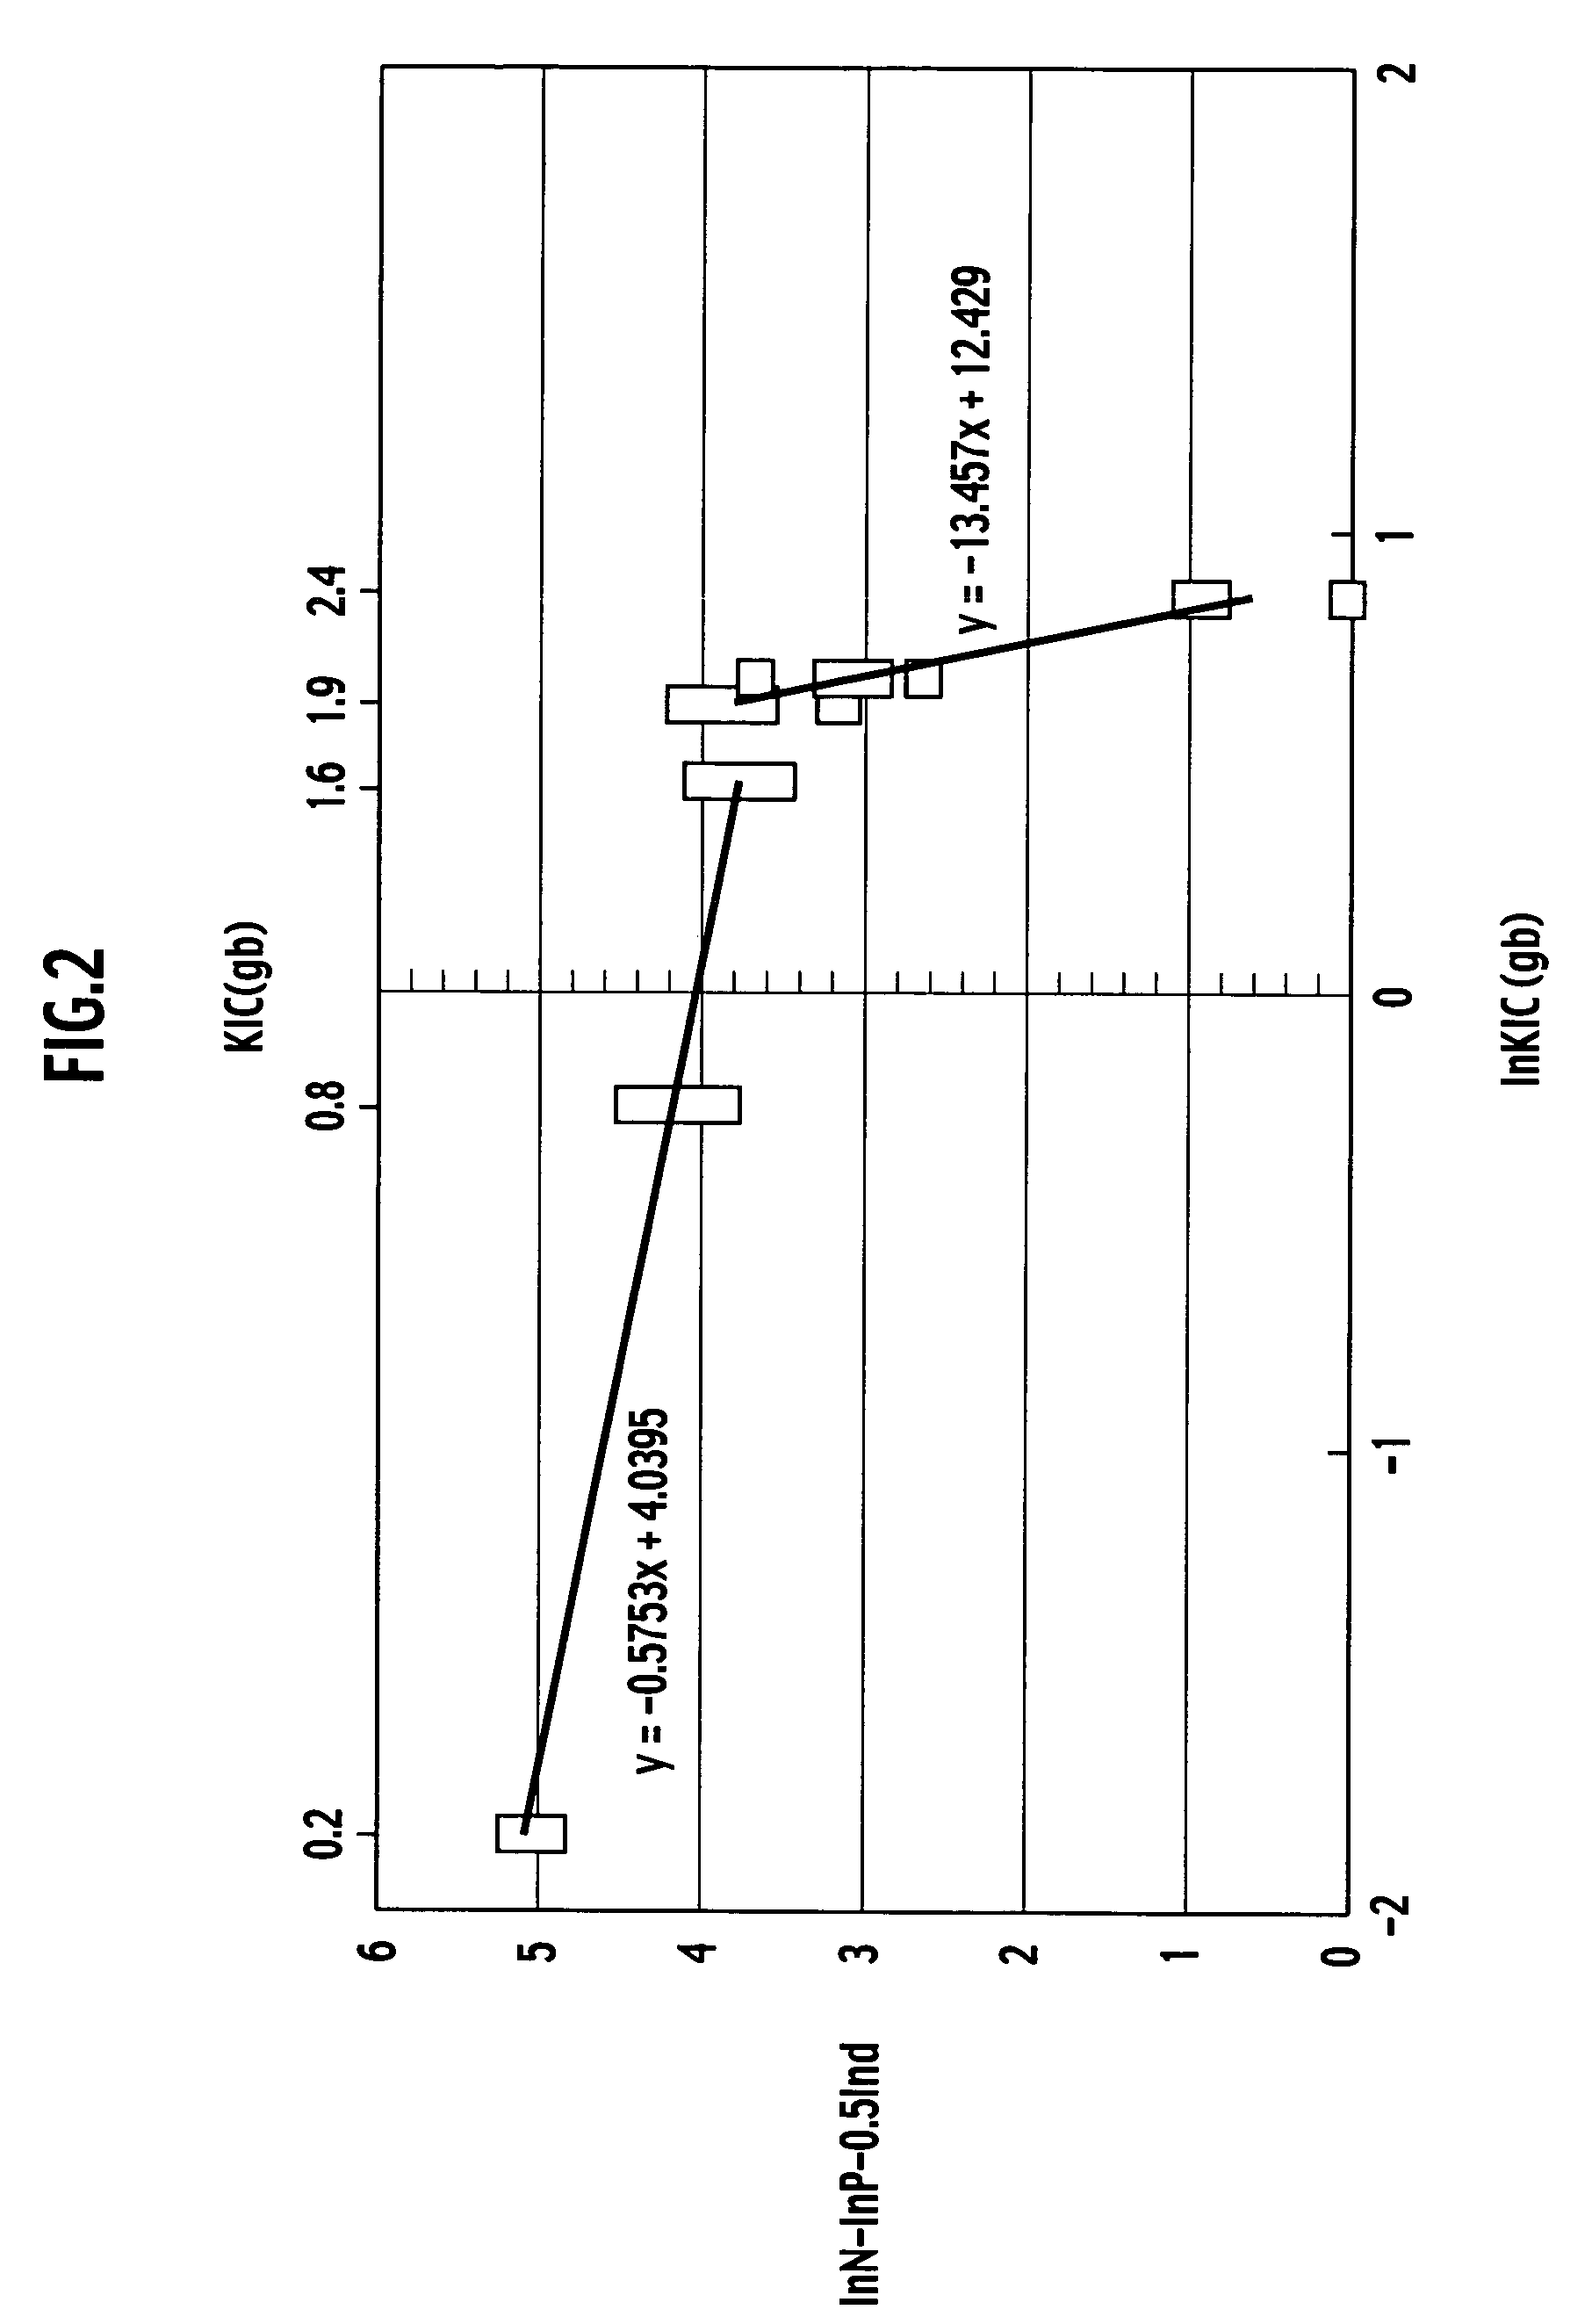 Aluminum nitride sintered body and method of evaluation for the same